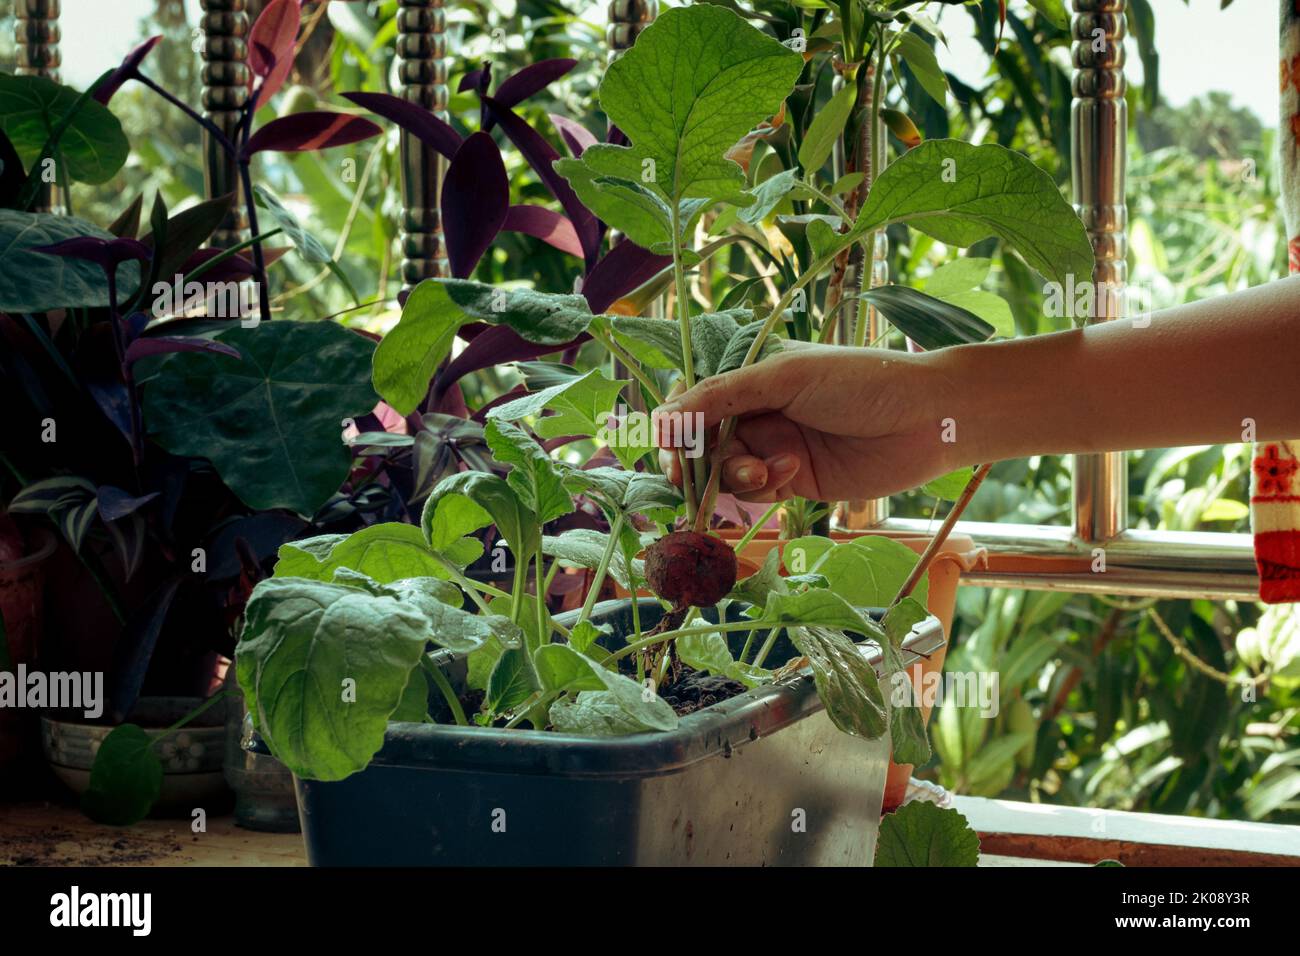 Hands harvesting organic homegrown red radish in an urban balcony garden showing eco-friendly and sustainable lifestyle Stock Photo